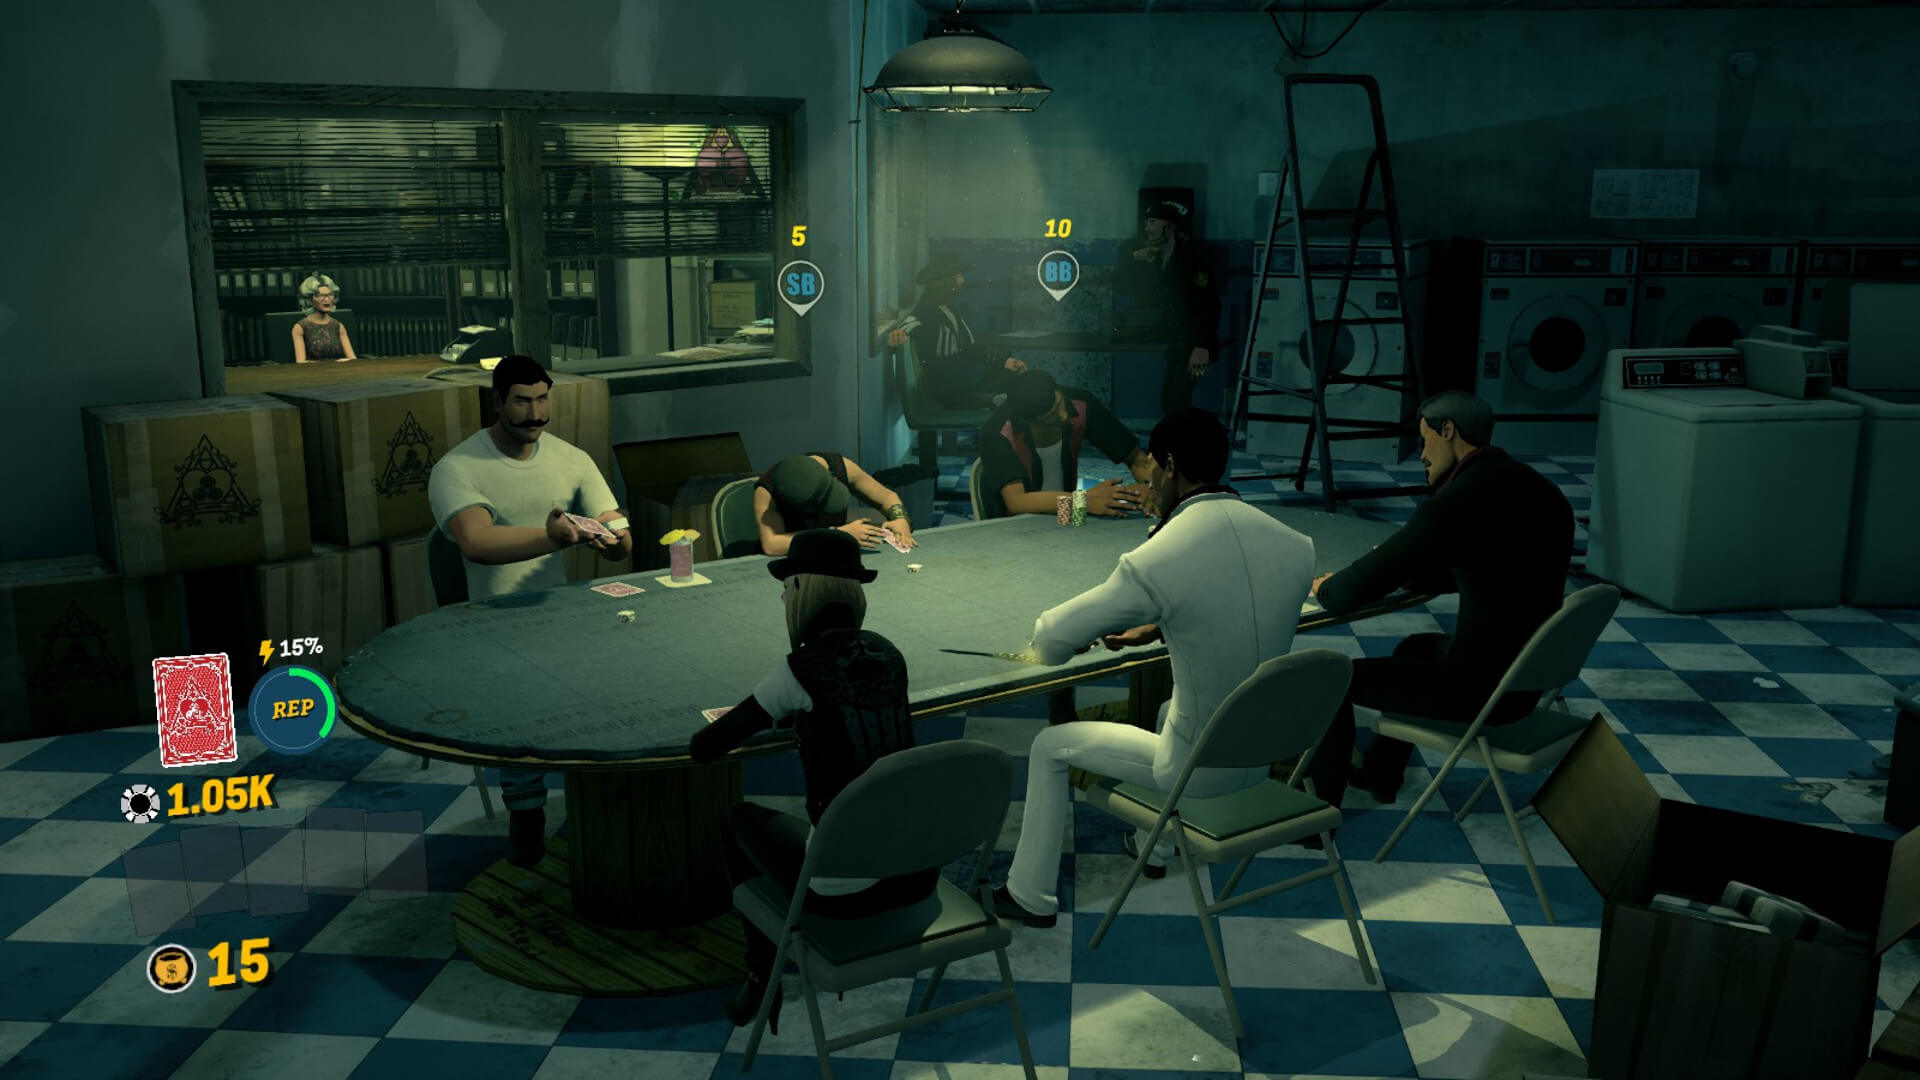 Prominence Poker, a game developed by new Jagex acquisition Pipeworks